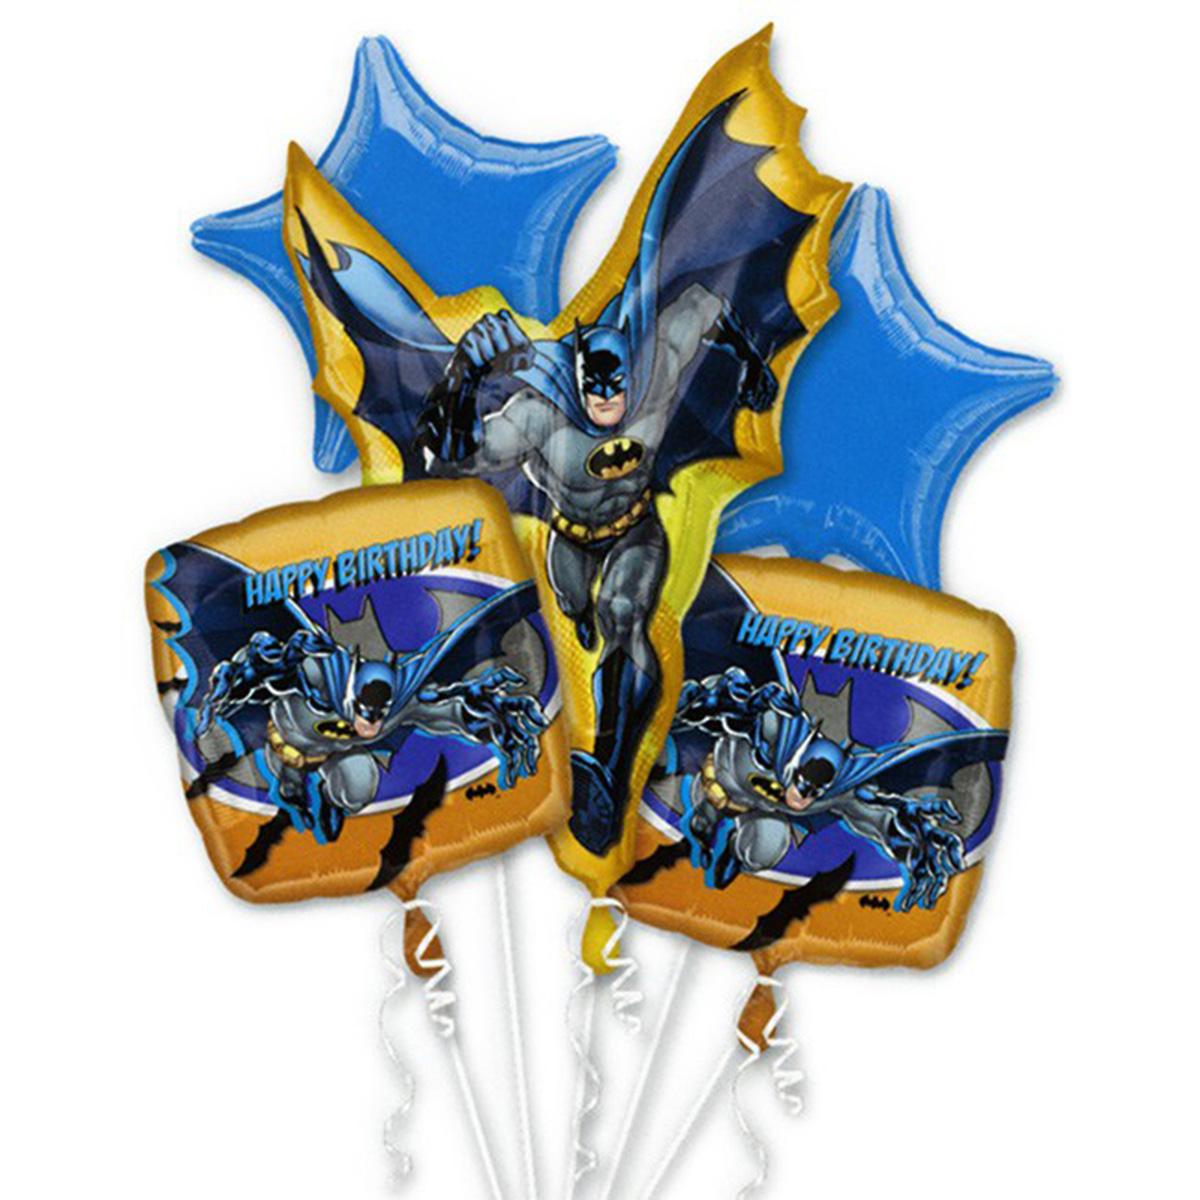 Batman Birthday Bouquet 5ct Balloons & Streamers - Party Centre - Party Centre